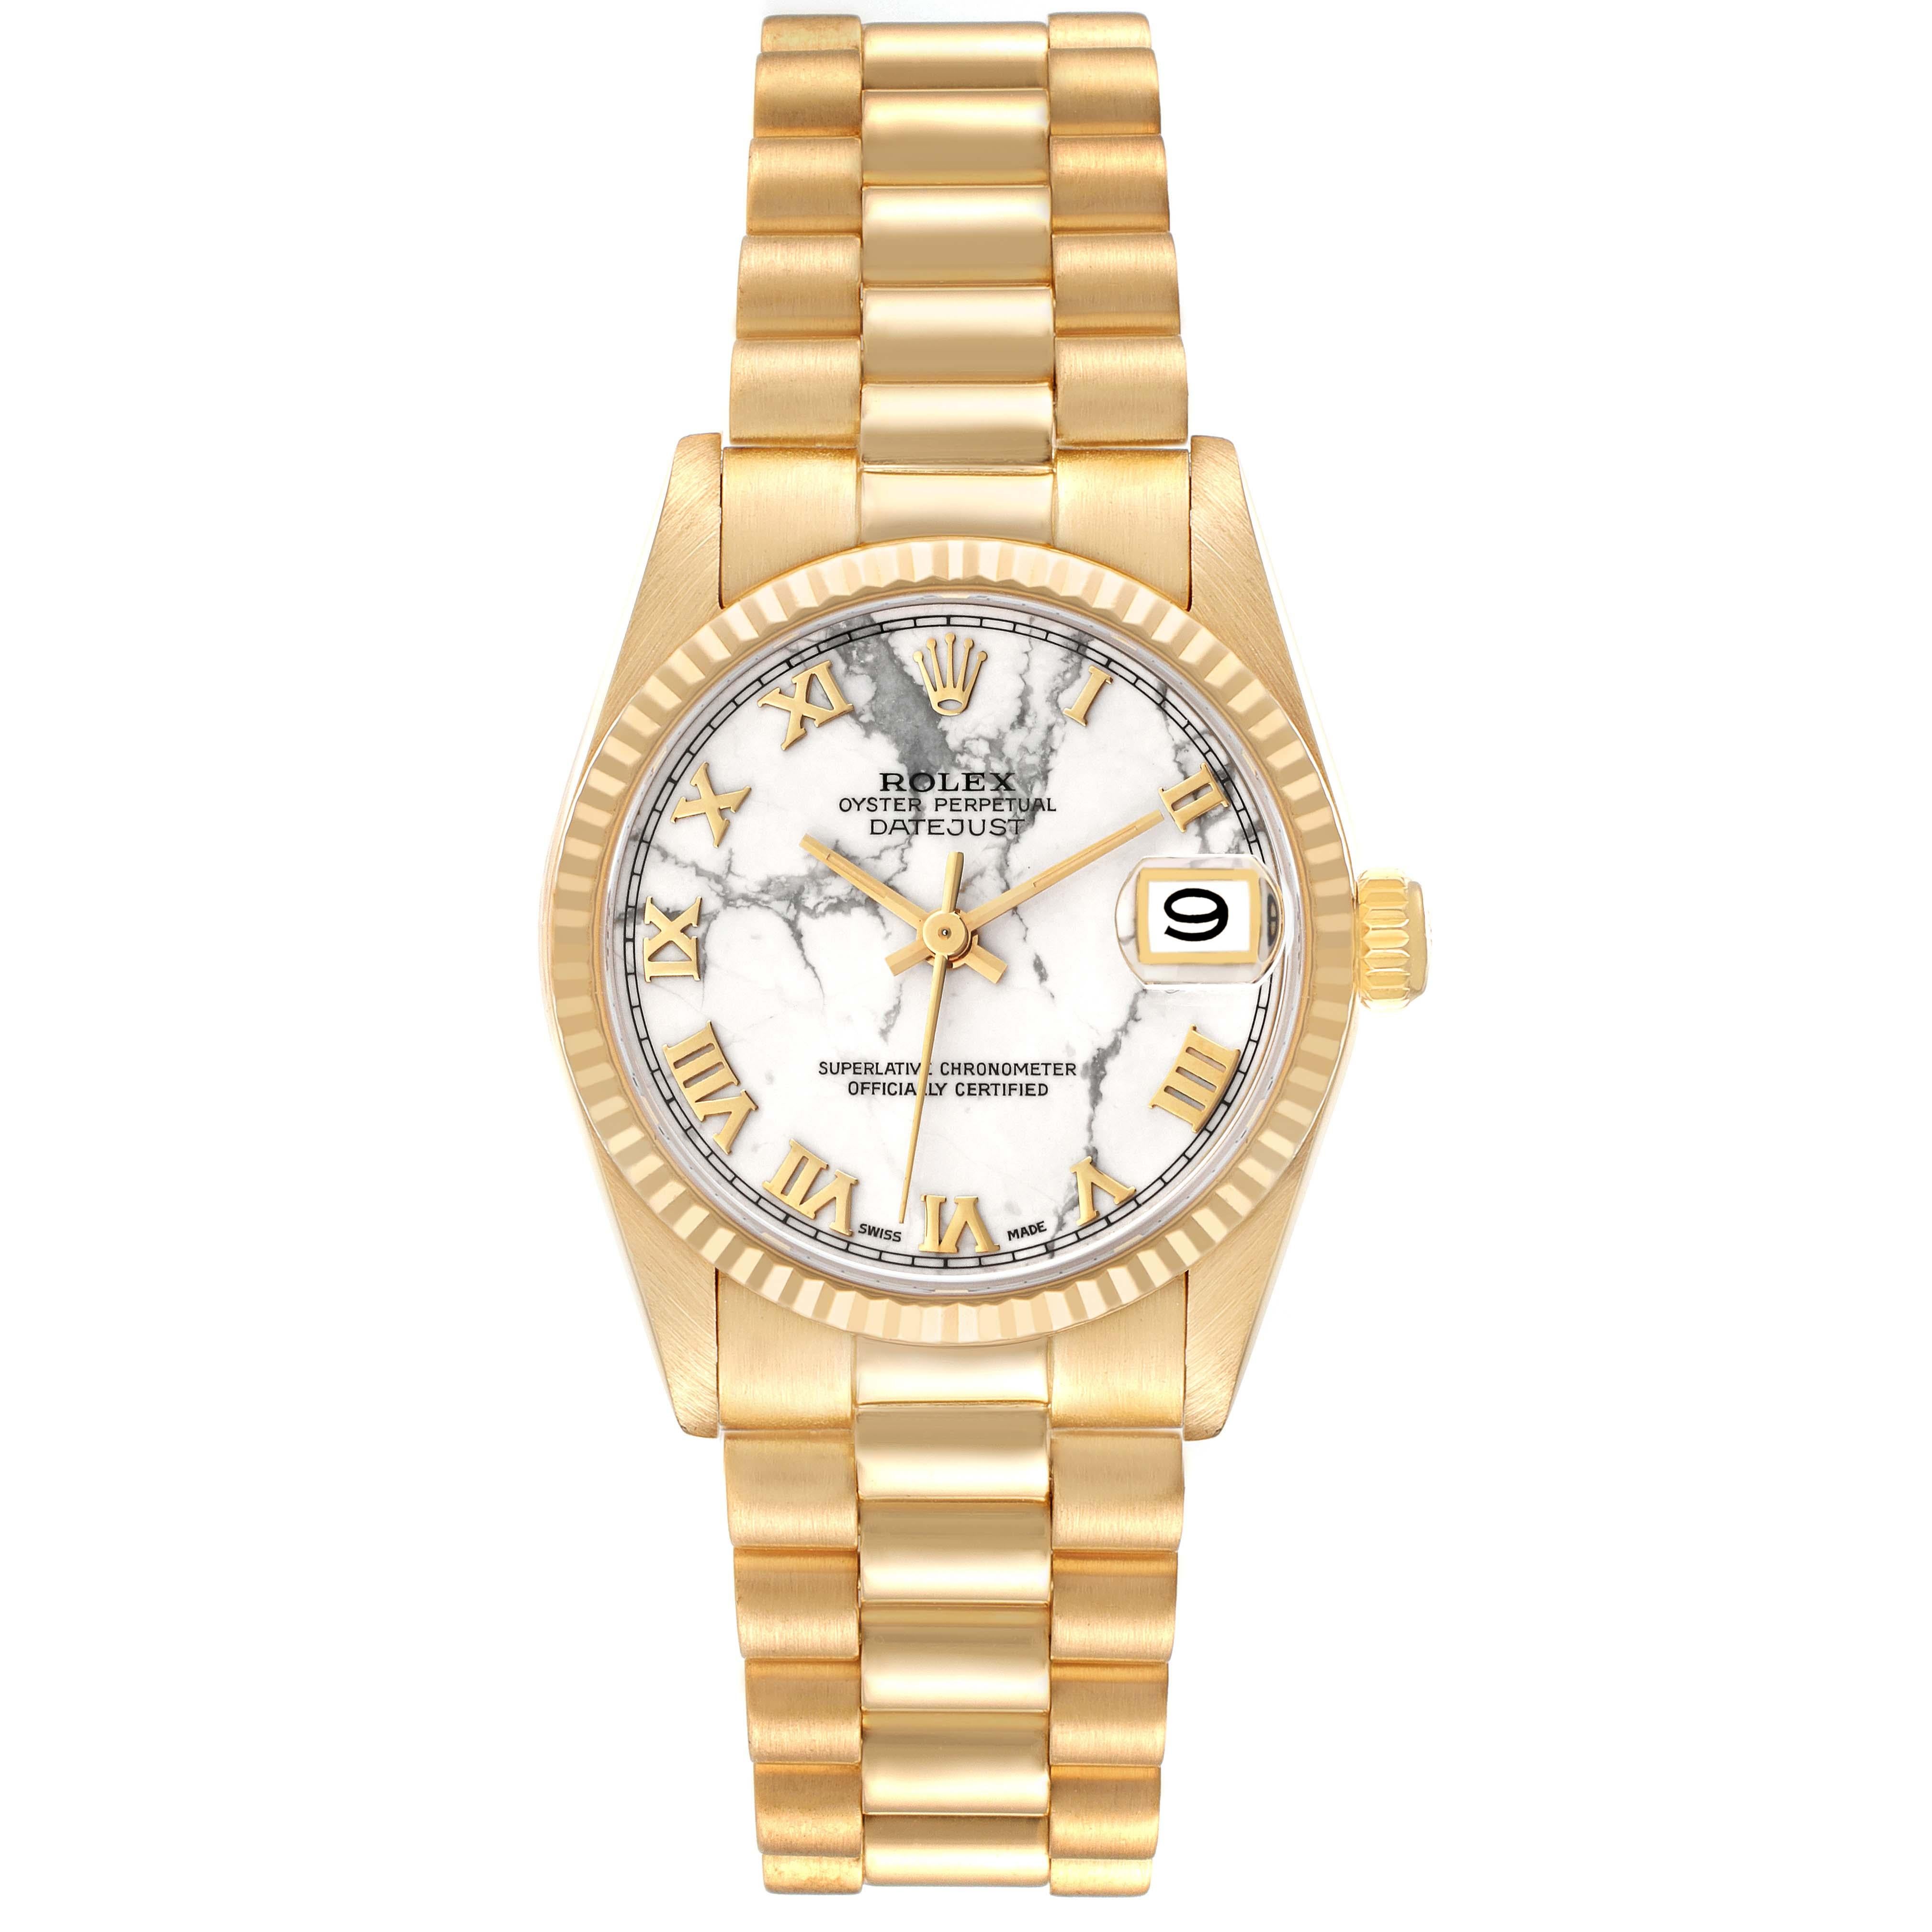 Rolex President Midsize Marble Dial Yellow Gold Ladies Watch 68278 Box Papers. Officially certified chronometer automatic self-winding movement. 18k yellow gold oyster case 31.0 mm in diameter. Rolex logo on the crown. 18k yellow gold fluted bezel.